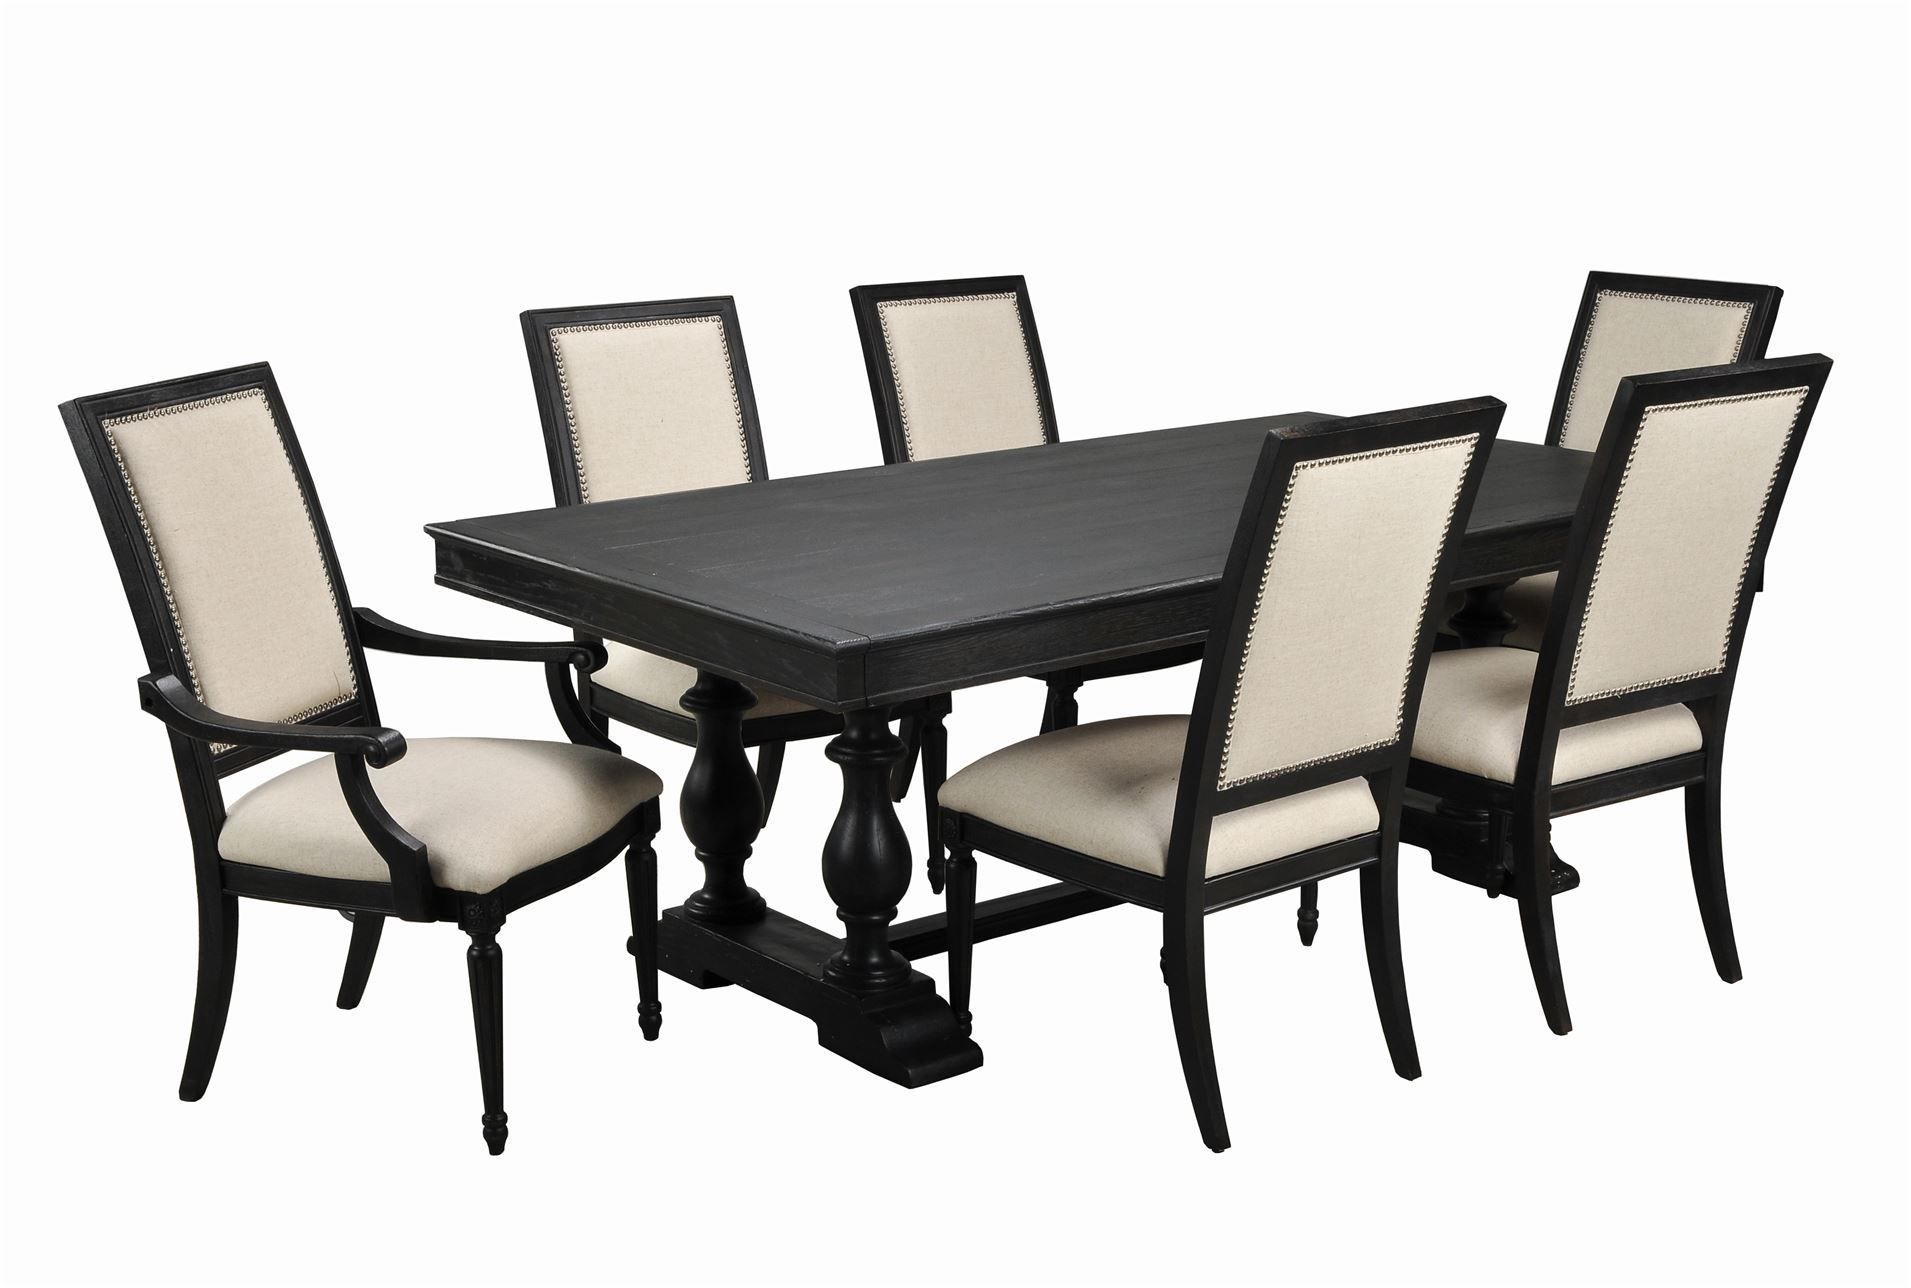 Chapleau 7 Piece Extension Dining Set | Decor & More | Pinterest Throughout 2017 Chapleau Ii 7 Piece Extension Dining Tables With Side Chairs (View 2 of 20)